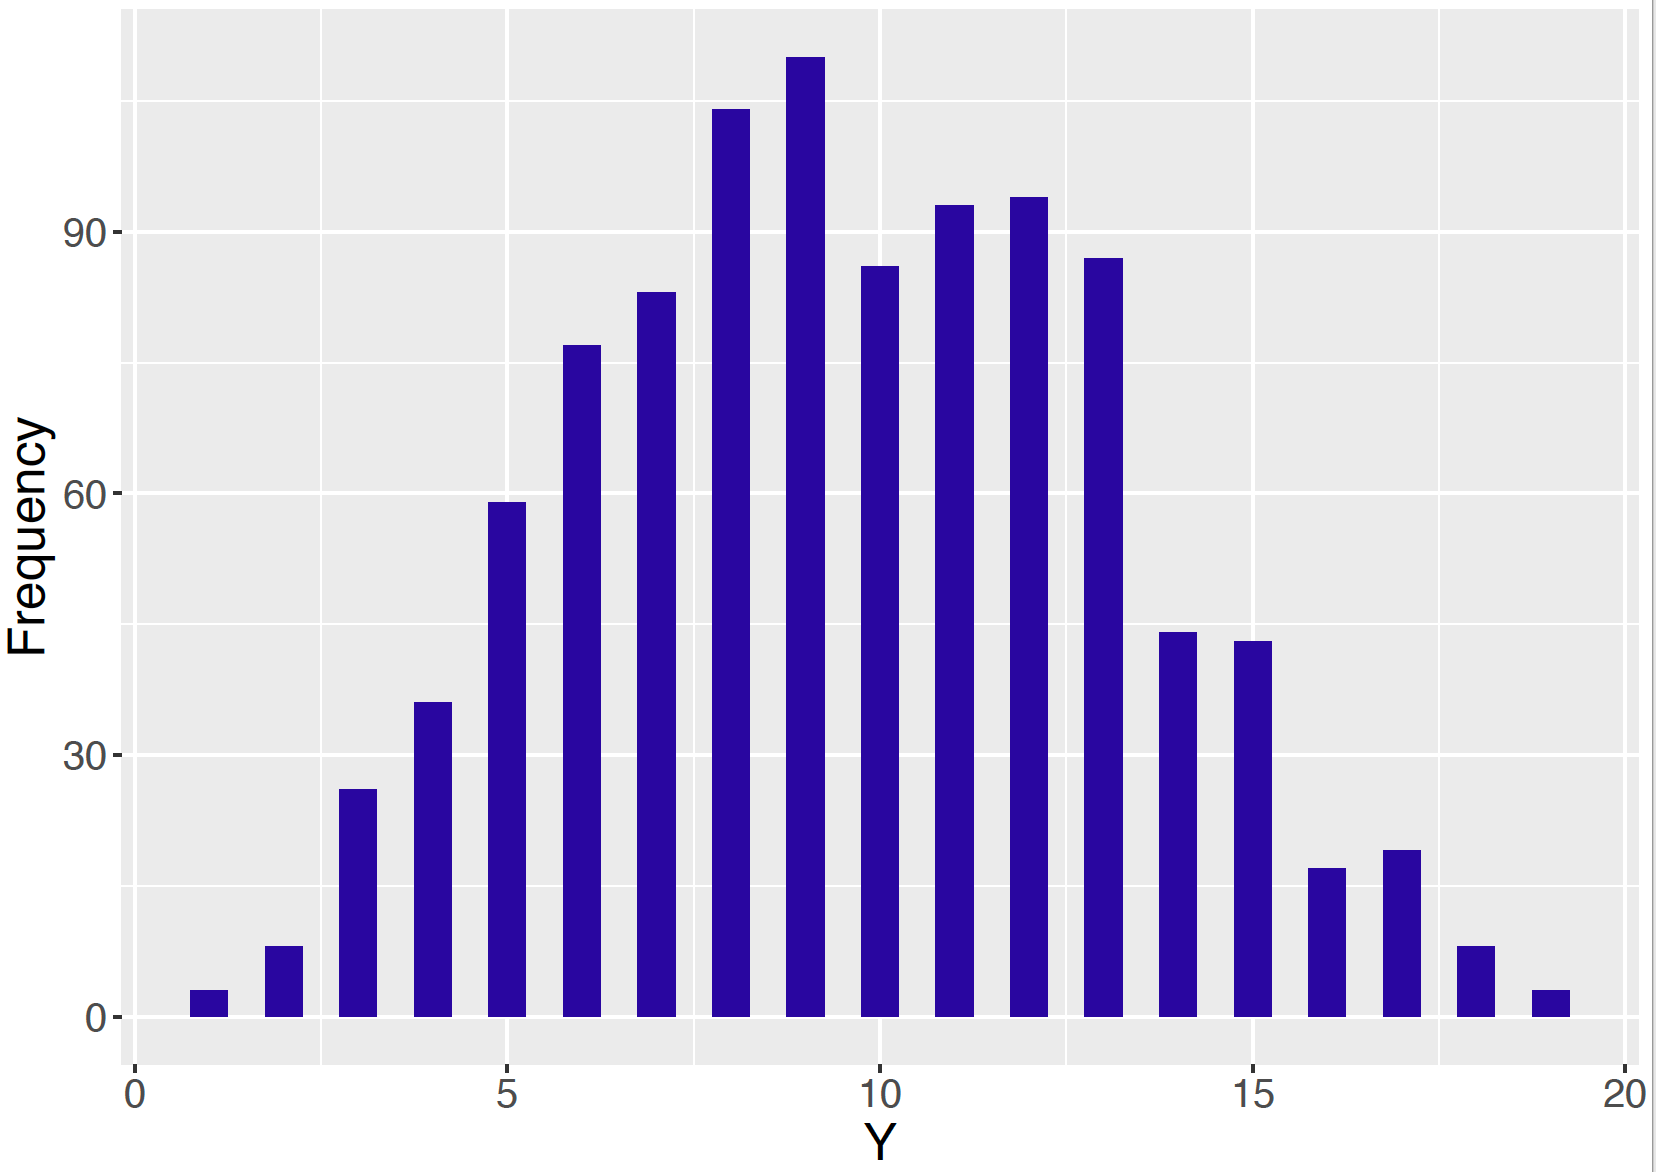 Histogram of simulated draws of $Y$ from Gibbs sampling for the Beta-Binomial model with $n = 20$, $a = 5$, and $b = 5$.